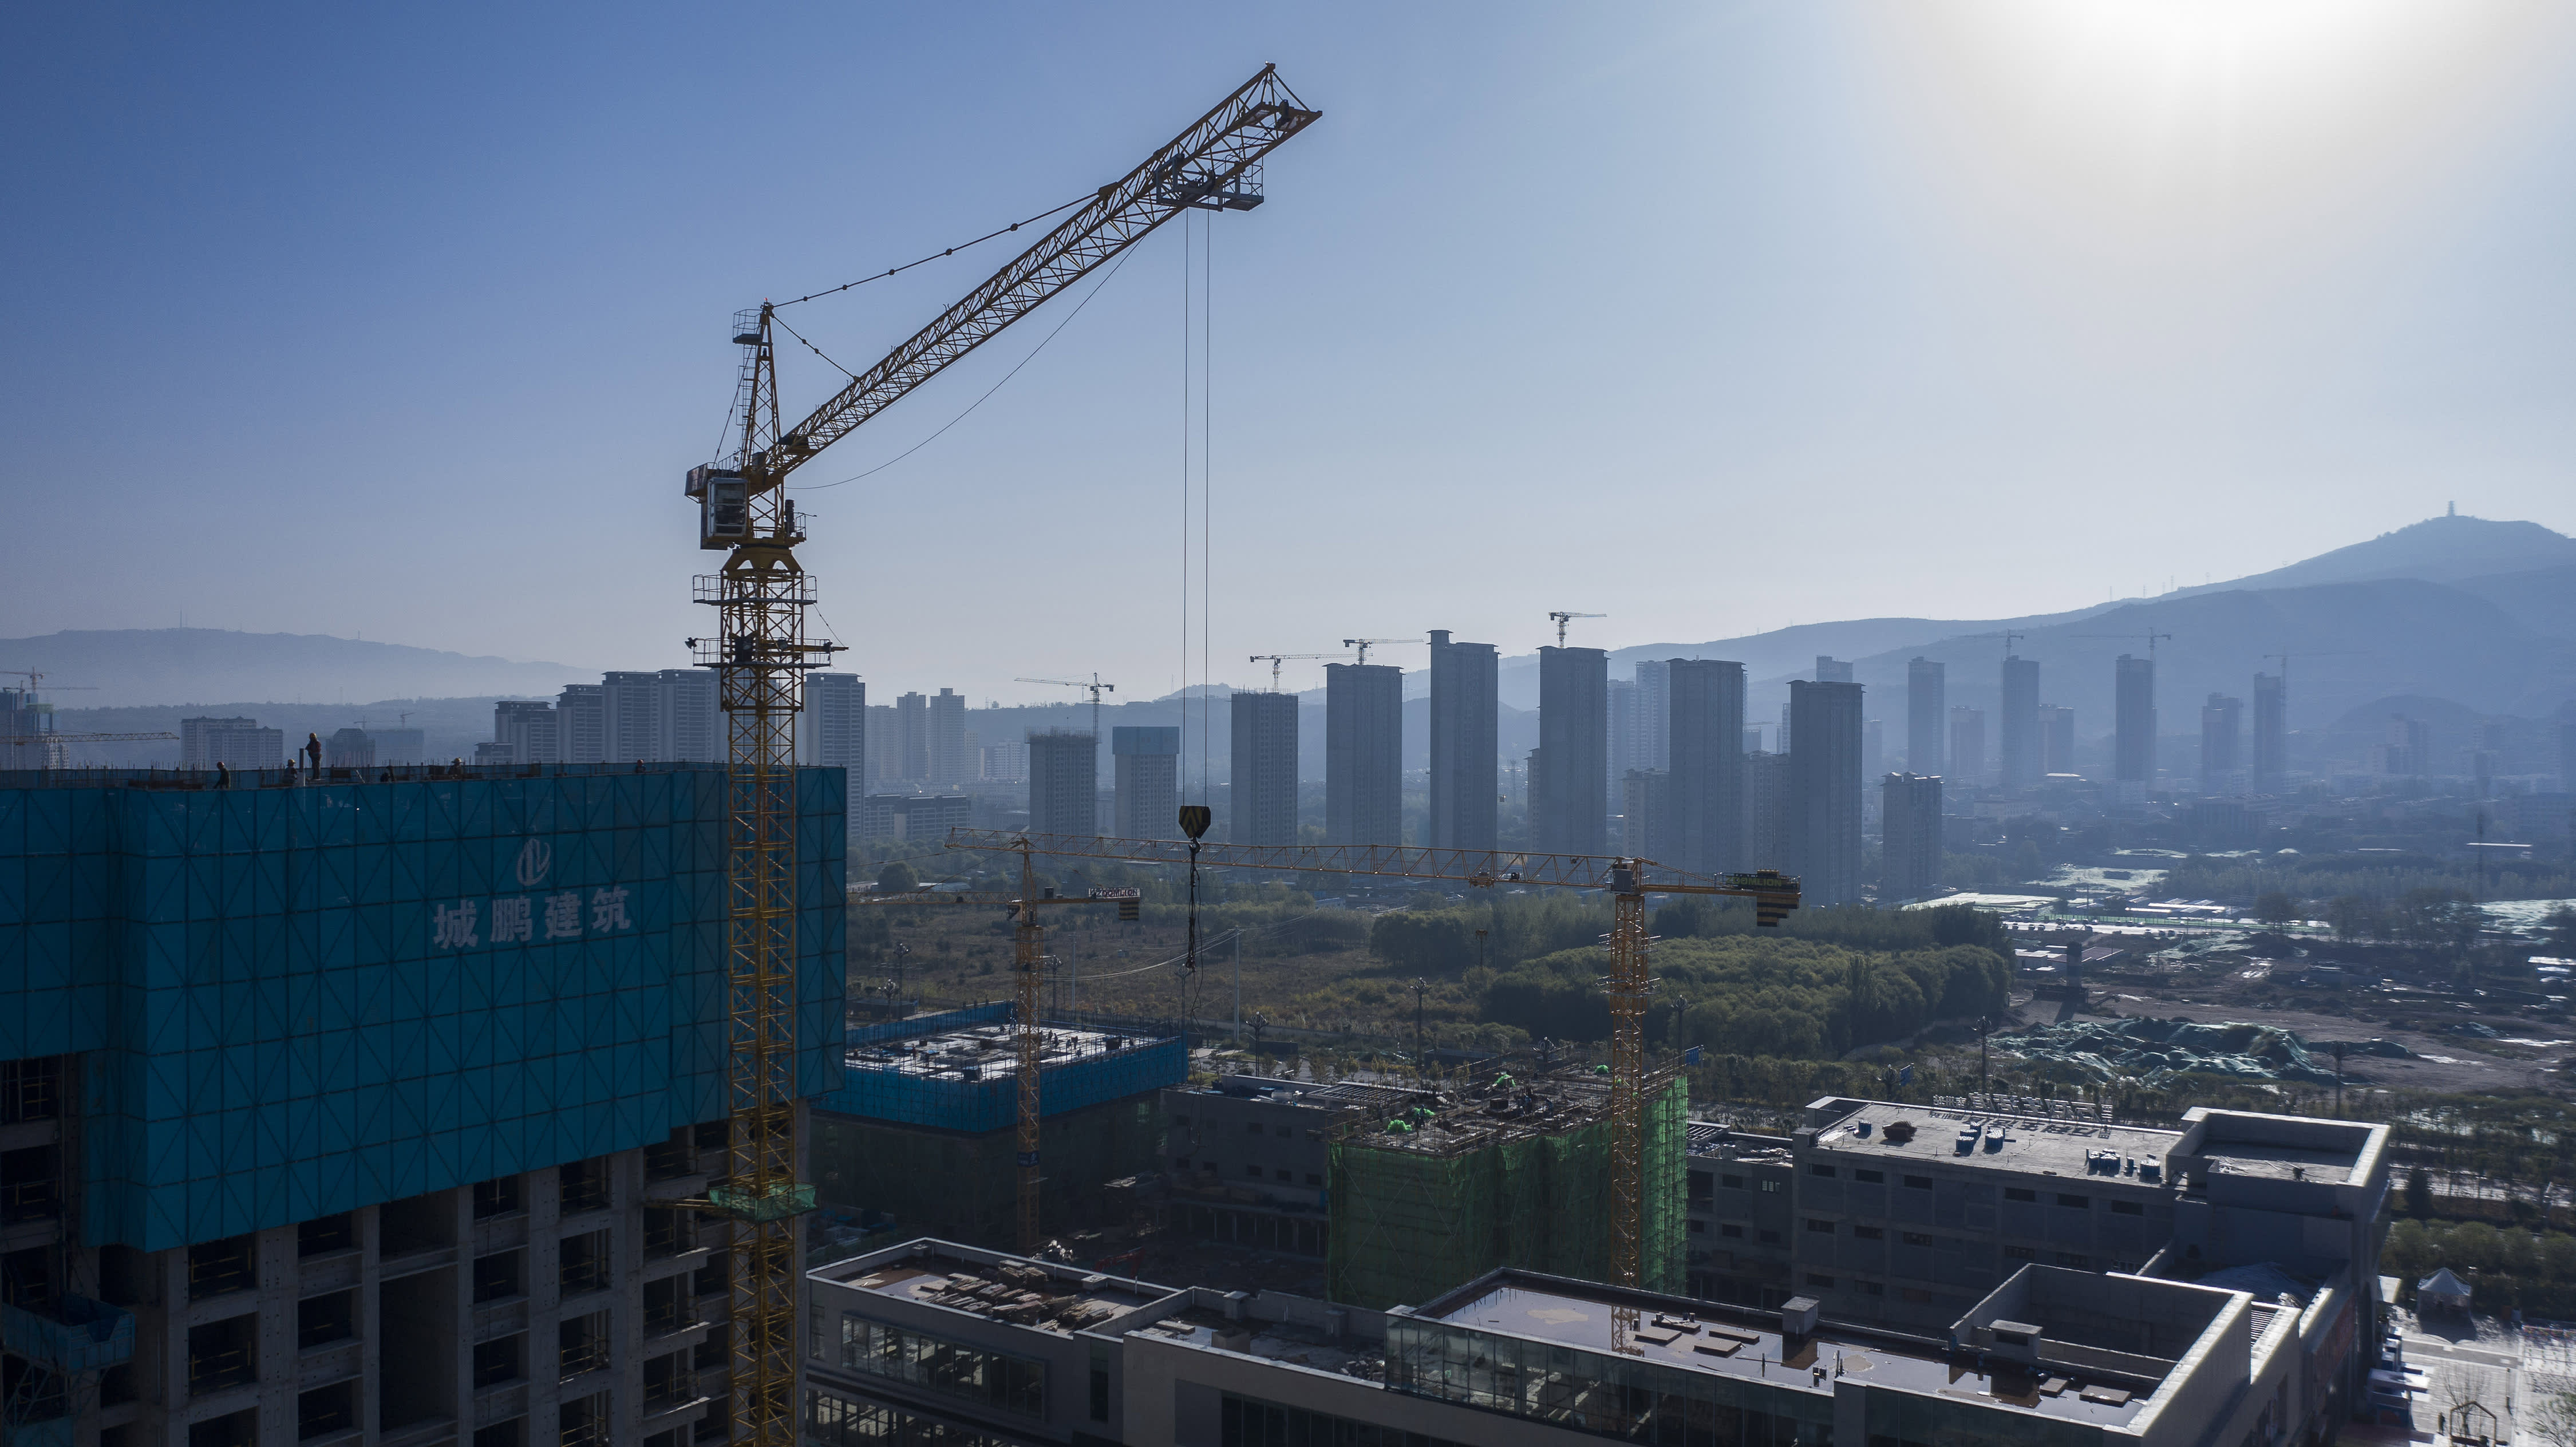 China’s real estate problems are getting worse and need Beijing’s support